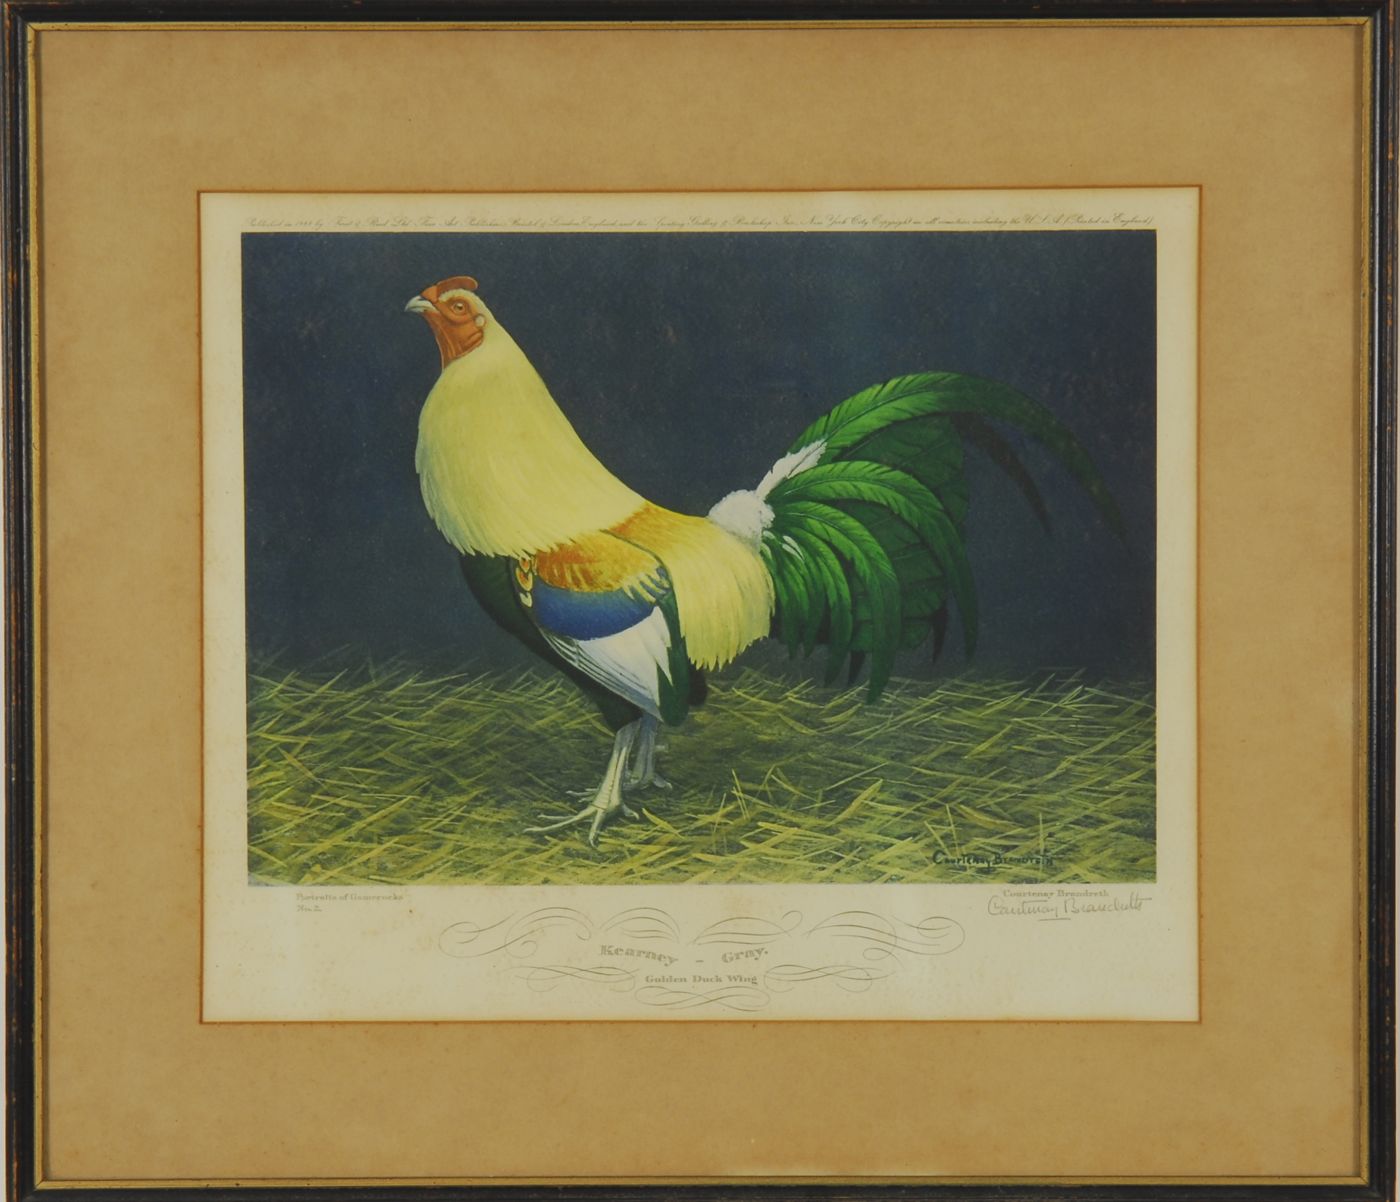 PAIR OF FRAMED COLORED COCK PRINTS The 14a8b7